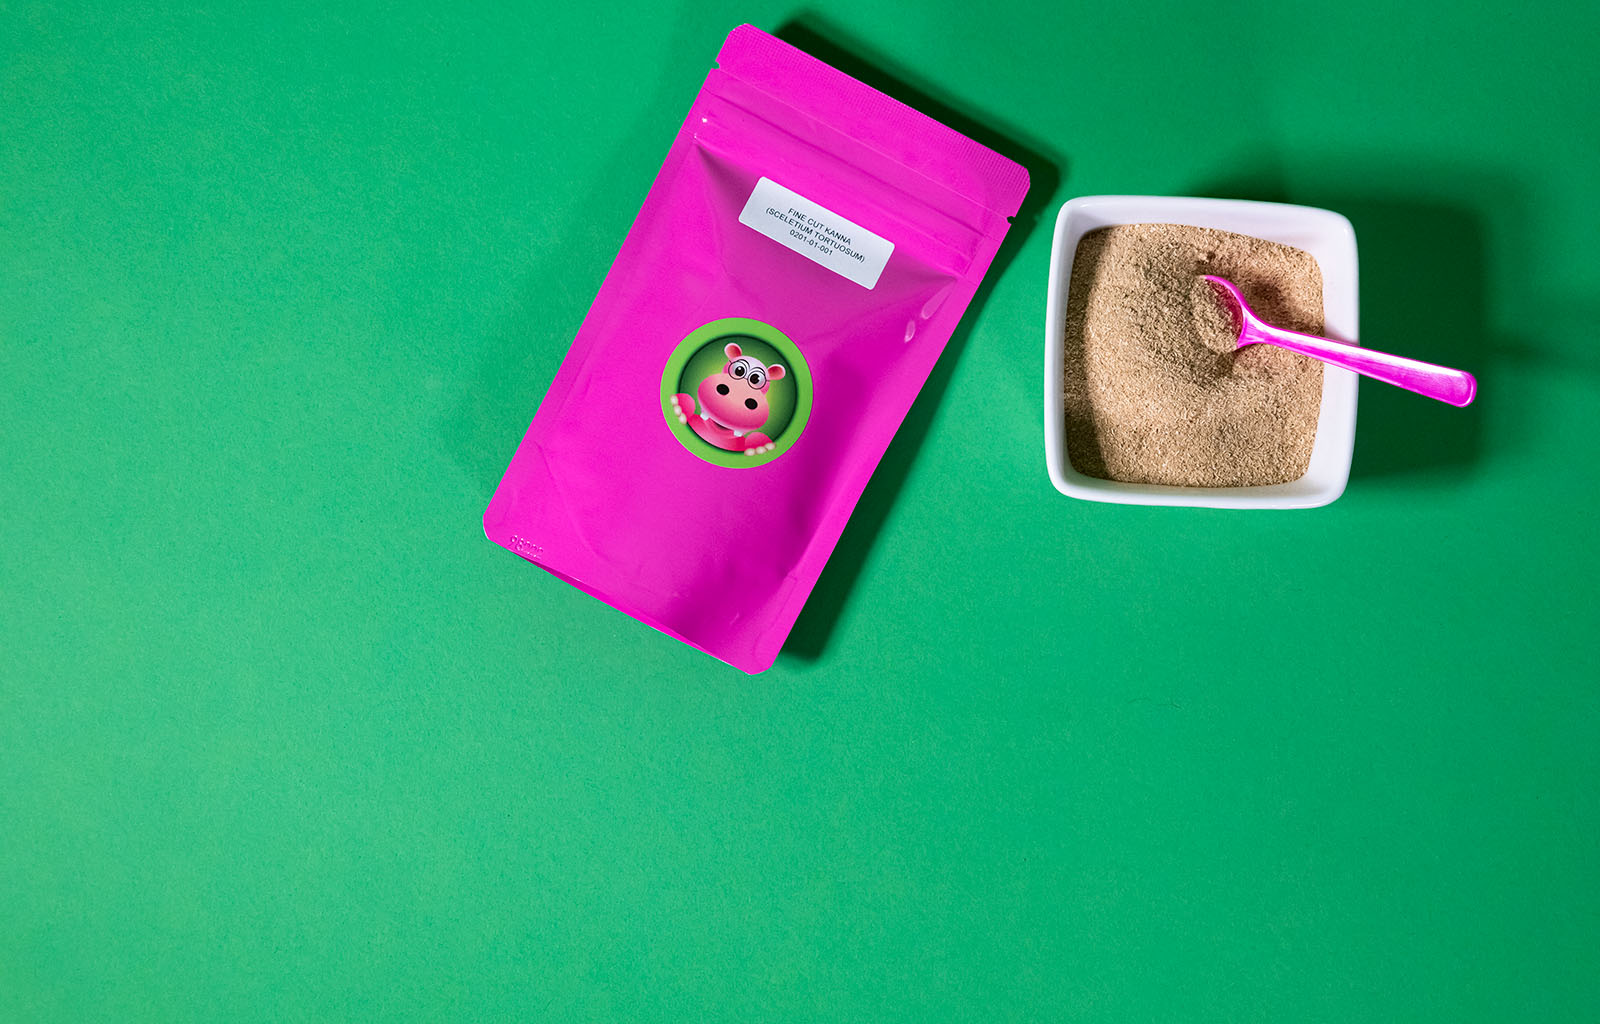 Featured image depicting a 4oz Packet of Happy Hippo brand Fine Cut Kanna Powder, and a ceramic bowl filled with loose kanna powder sitting against a green background; a 1 gram measuring scoop rests inside the bowl of loose kanna powder.